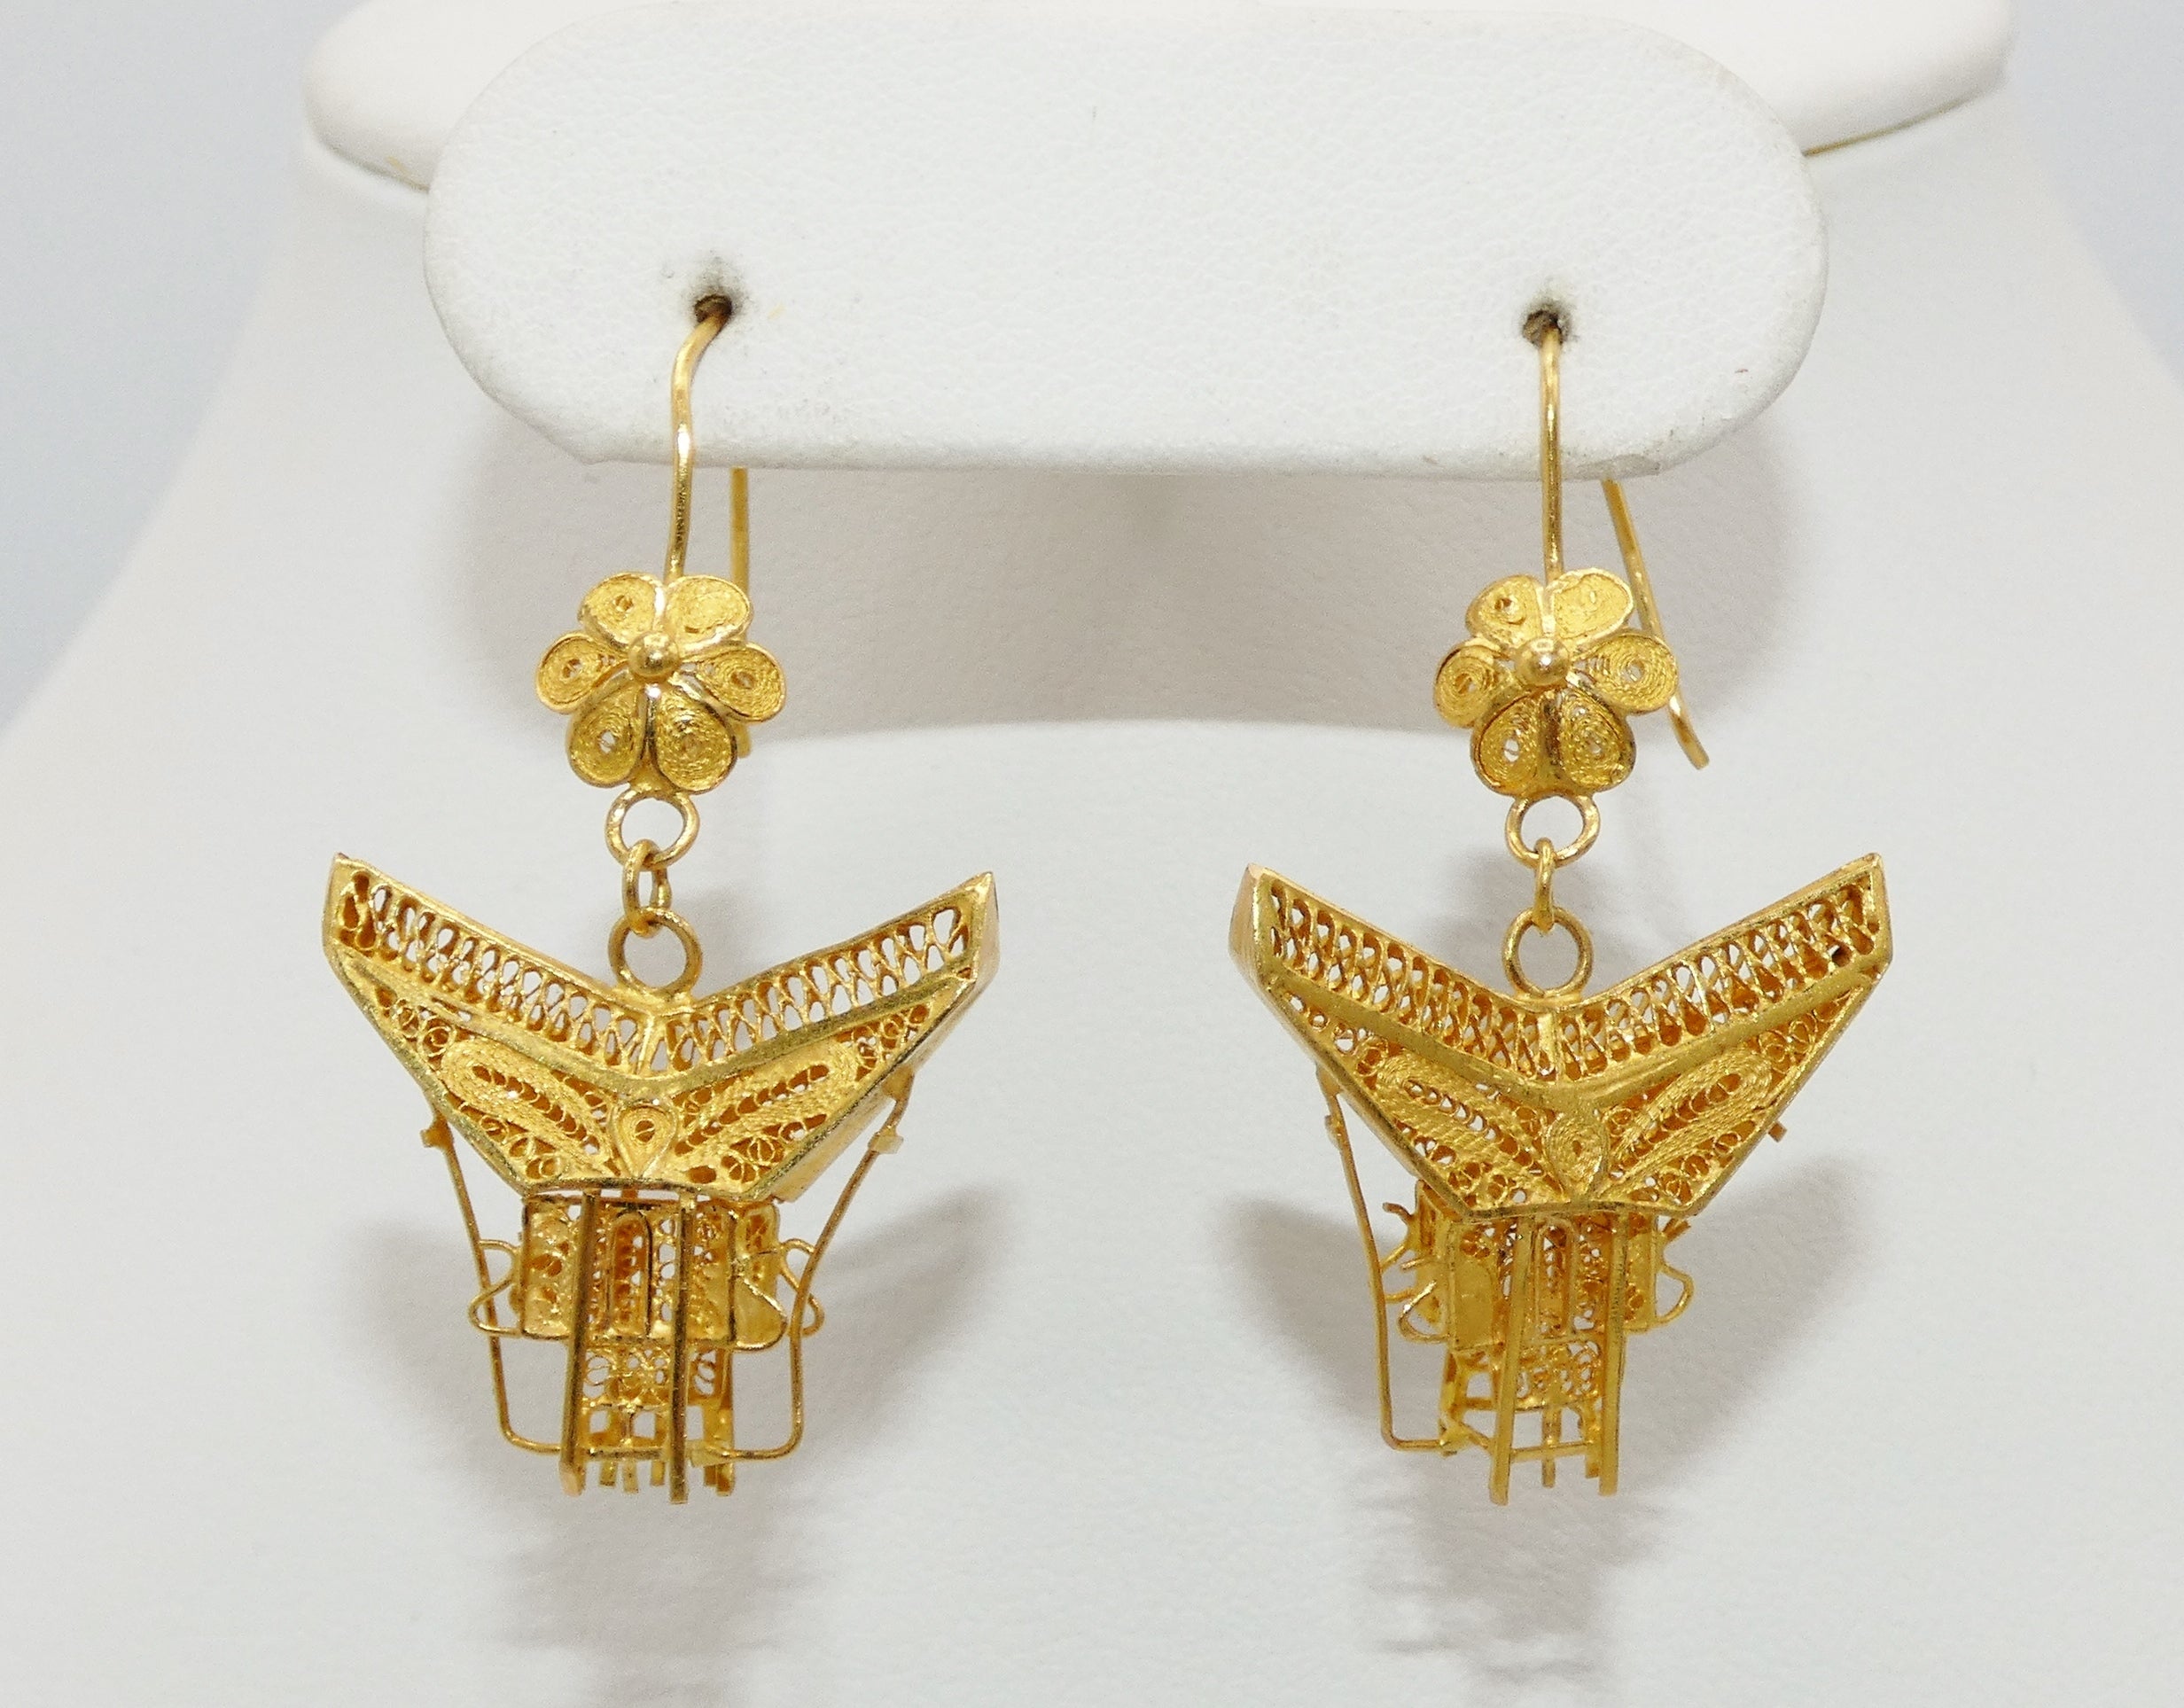 22K Gold Earrings Design As Your Perfect Gift